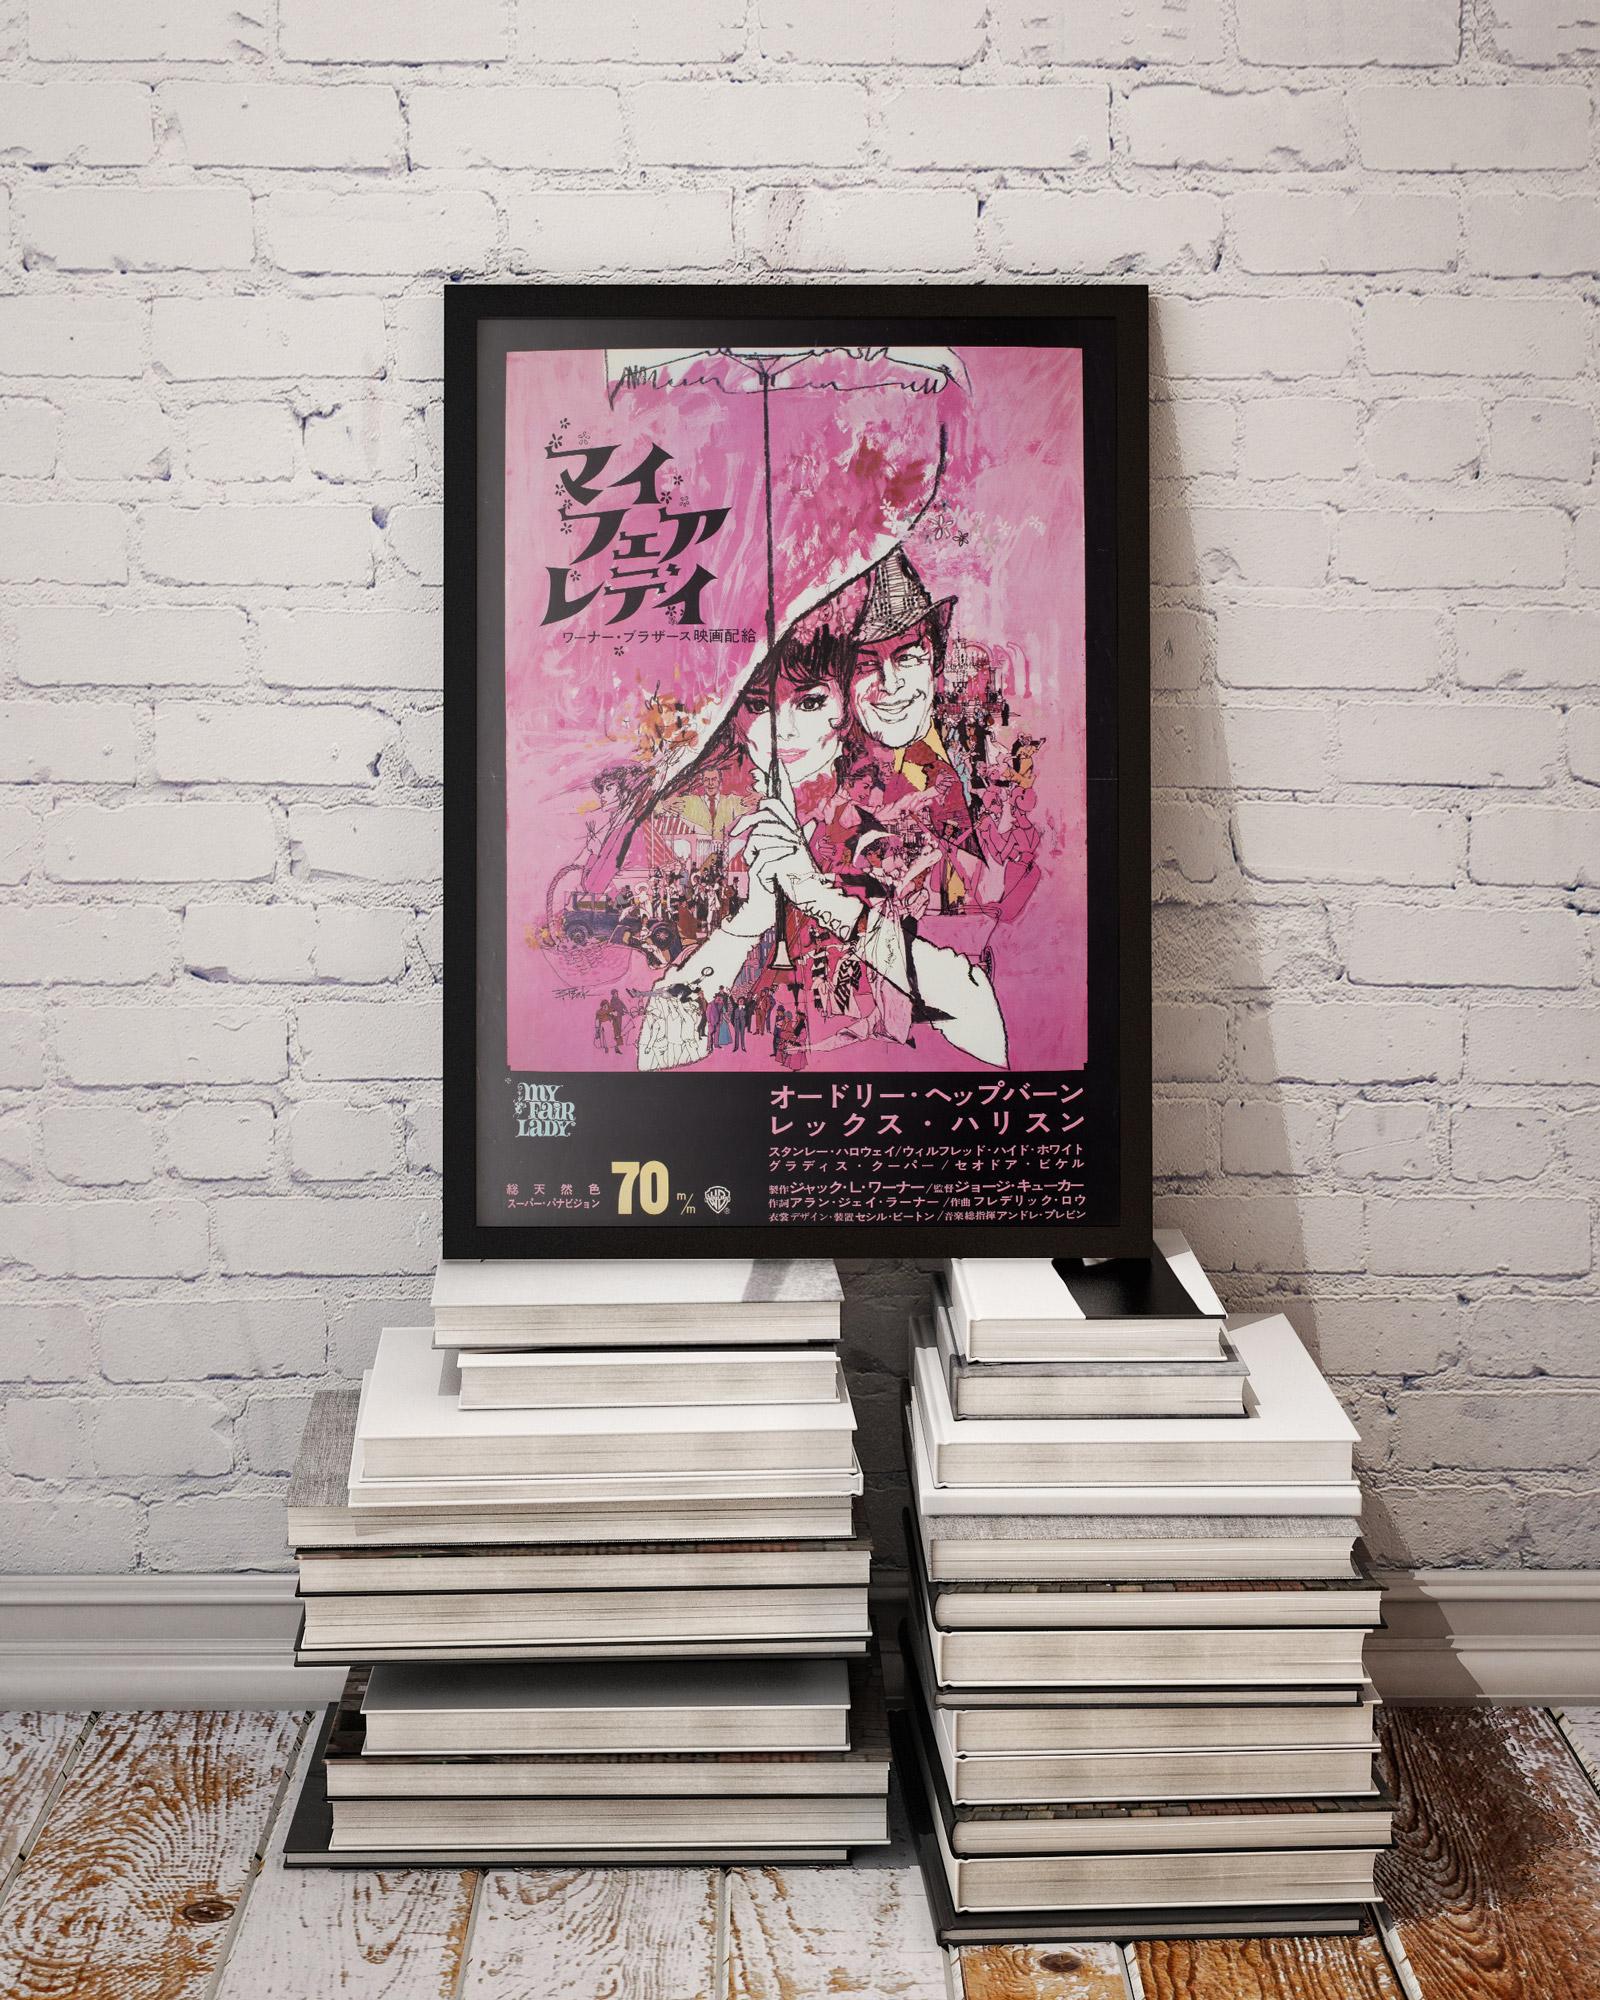 Peak and Gold's charming design for family classic My Fair Lady looks particularly snazzy with the Japanese typography on this original film poster for a rare early 70 mm re-release screening in Japan.

This vintage movie poster is sized 14 1/4 x